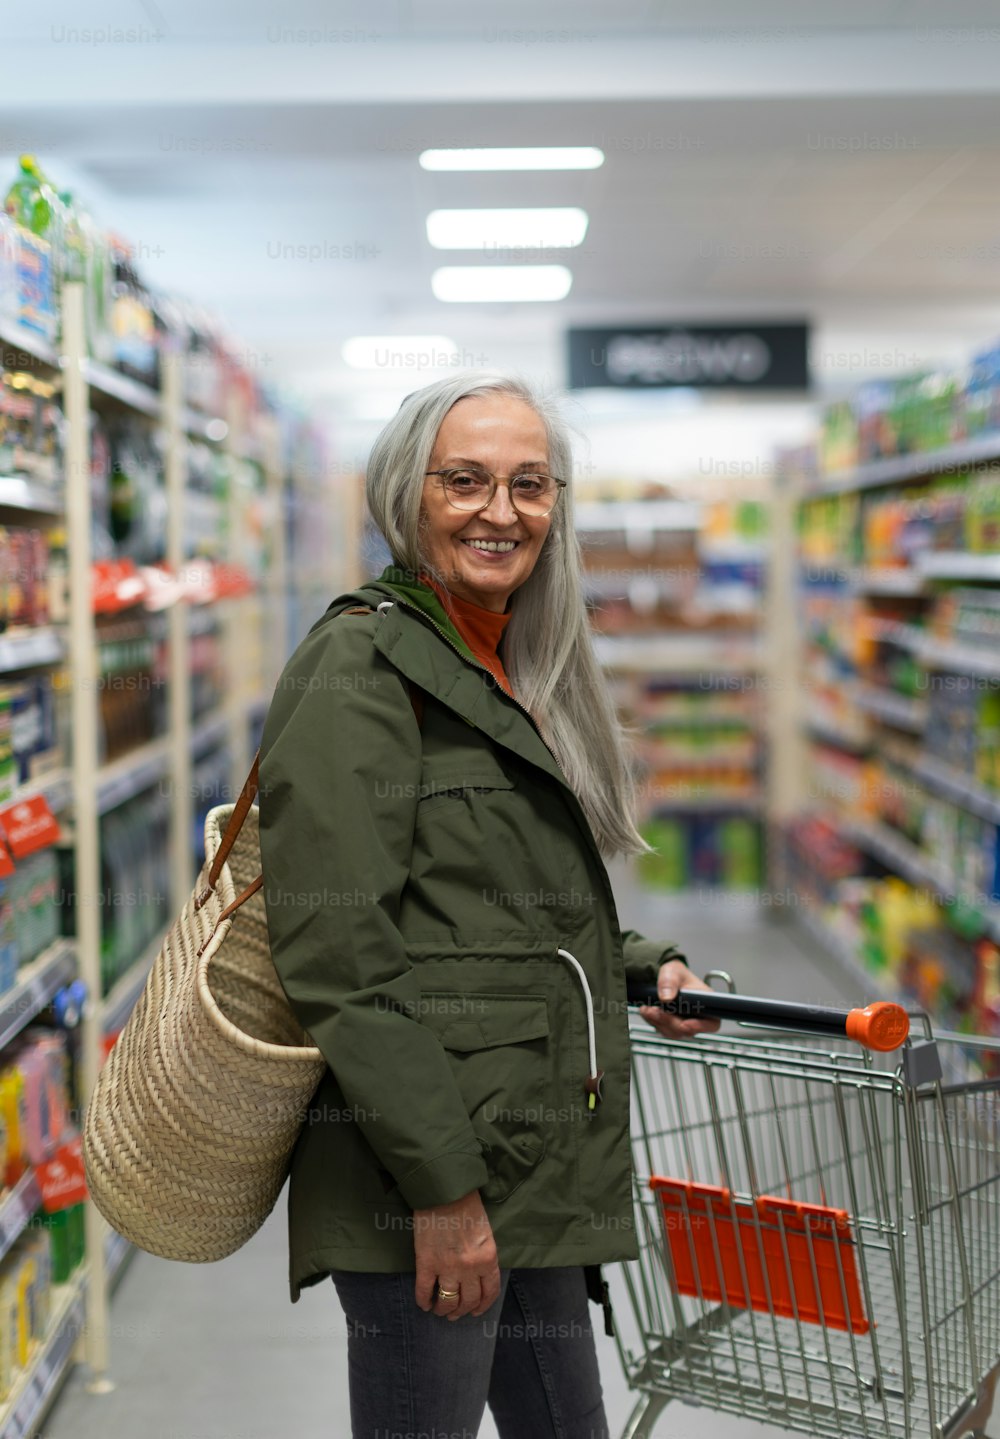 An elder woman standing and shopping in supermarket.